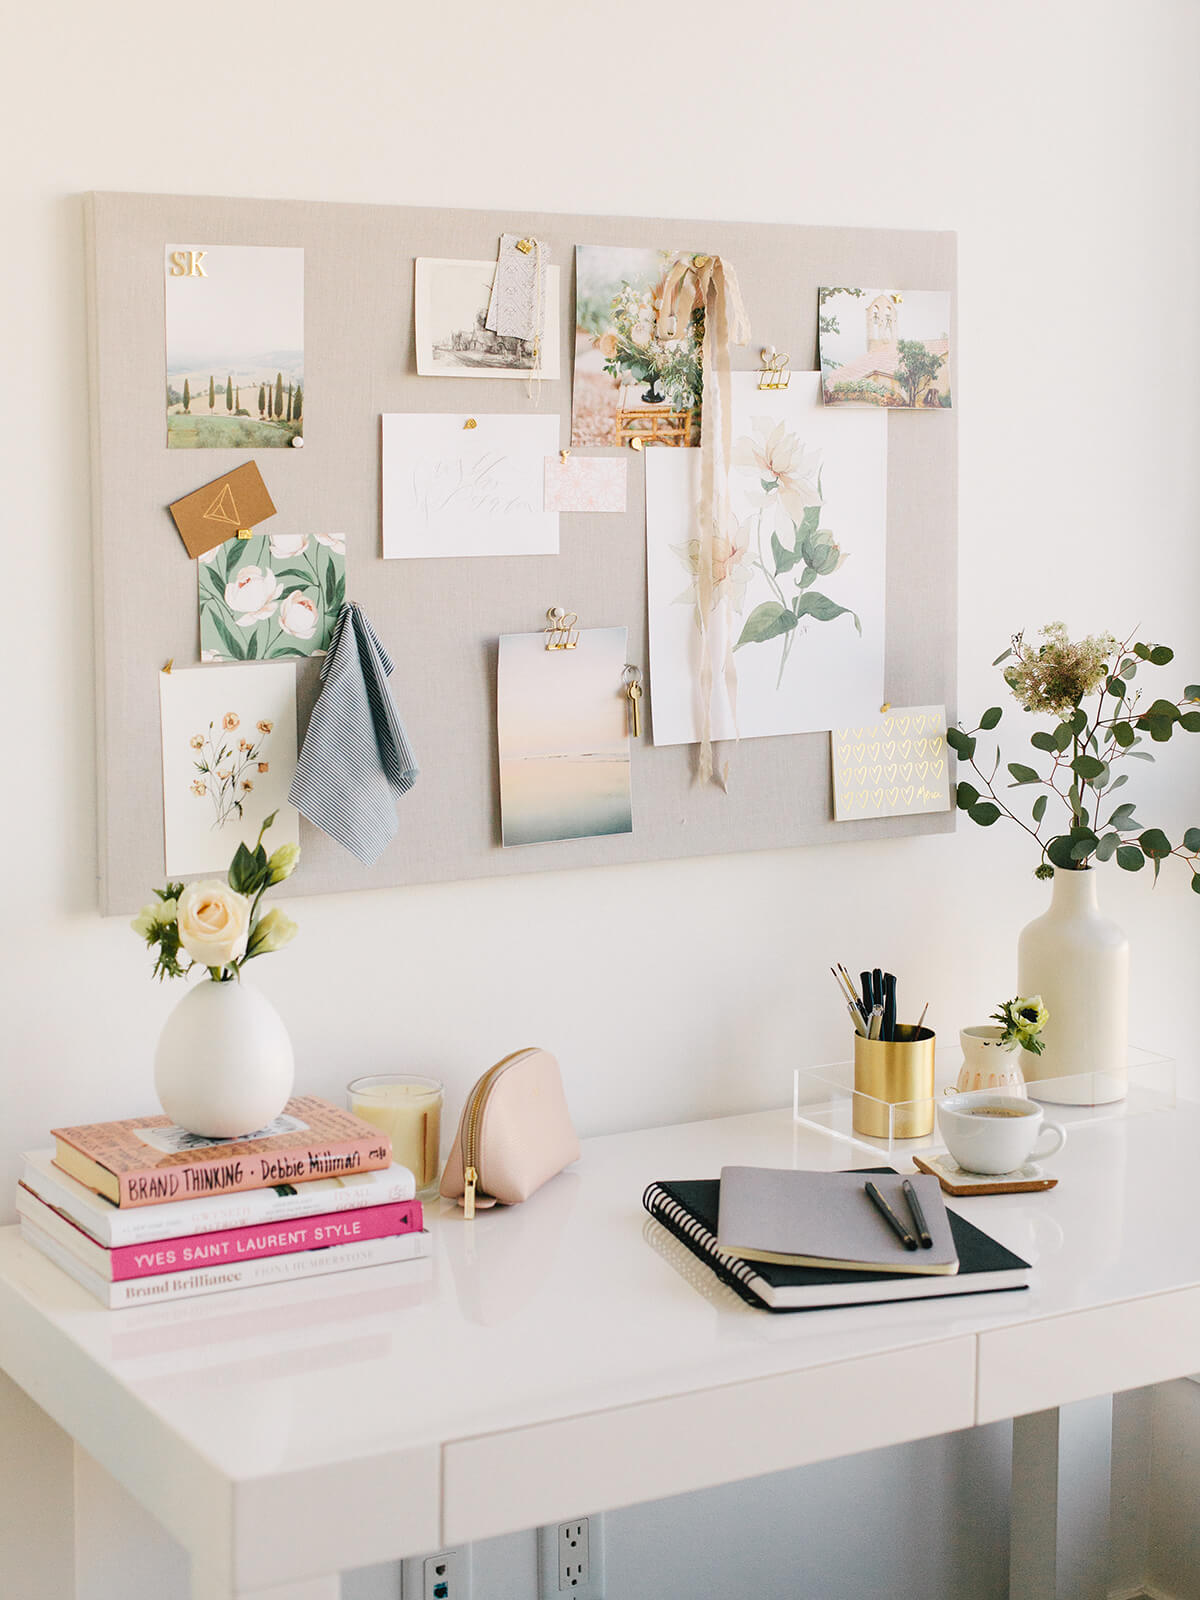 23 Inspiring Home Office Decor Ideas | Apartment Therapy